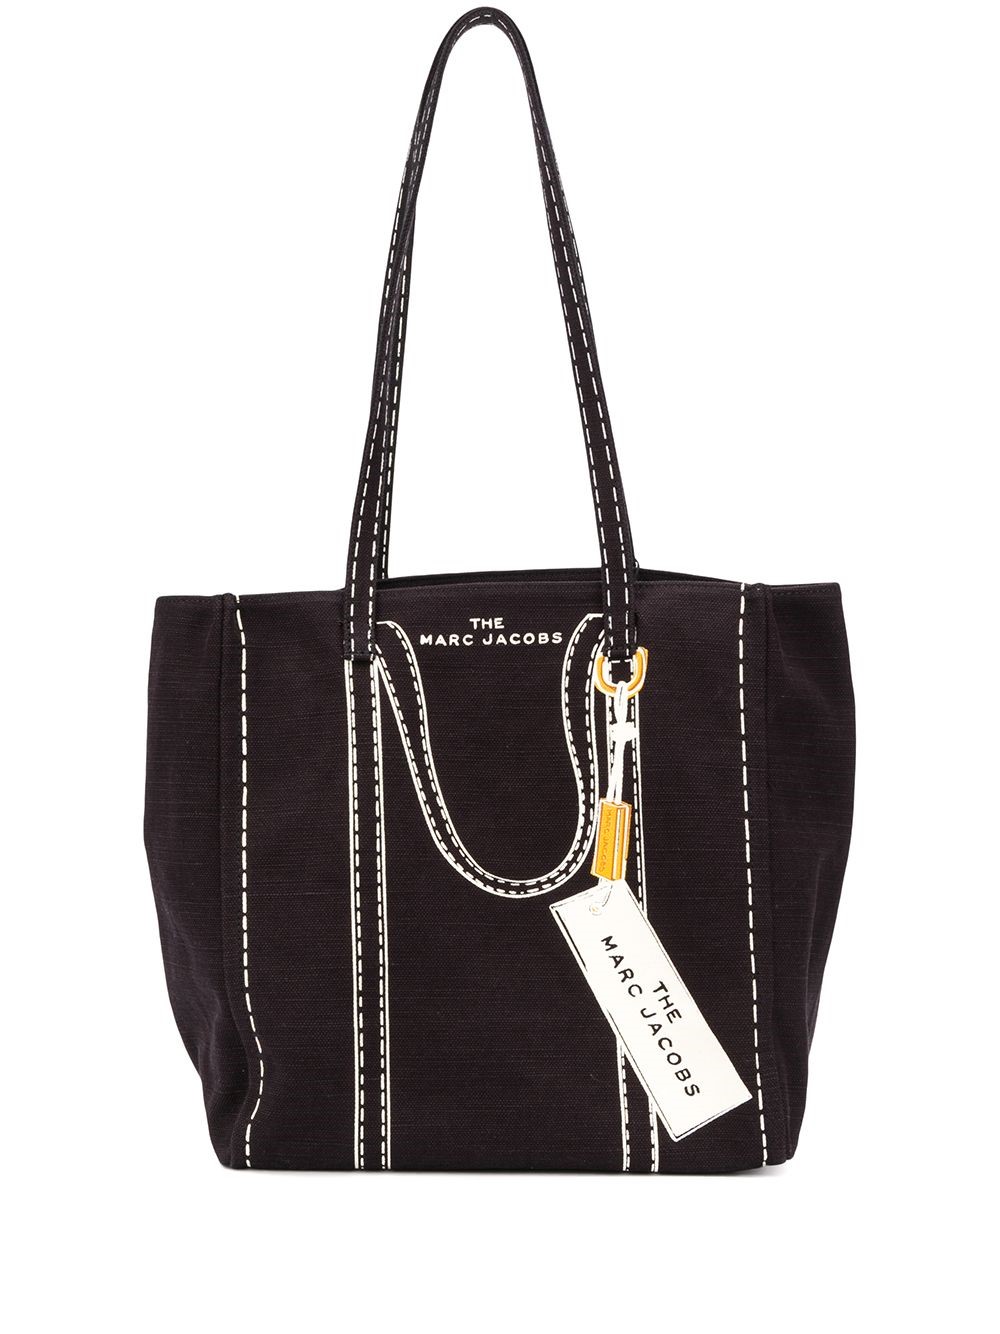 marc jacobs THE TAG 27 TOTE BAG available on www.bagsaleusa.com - 32794